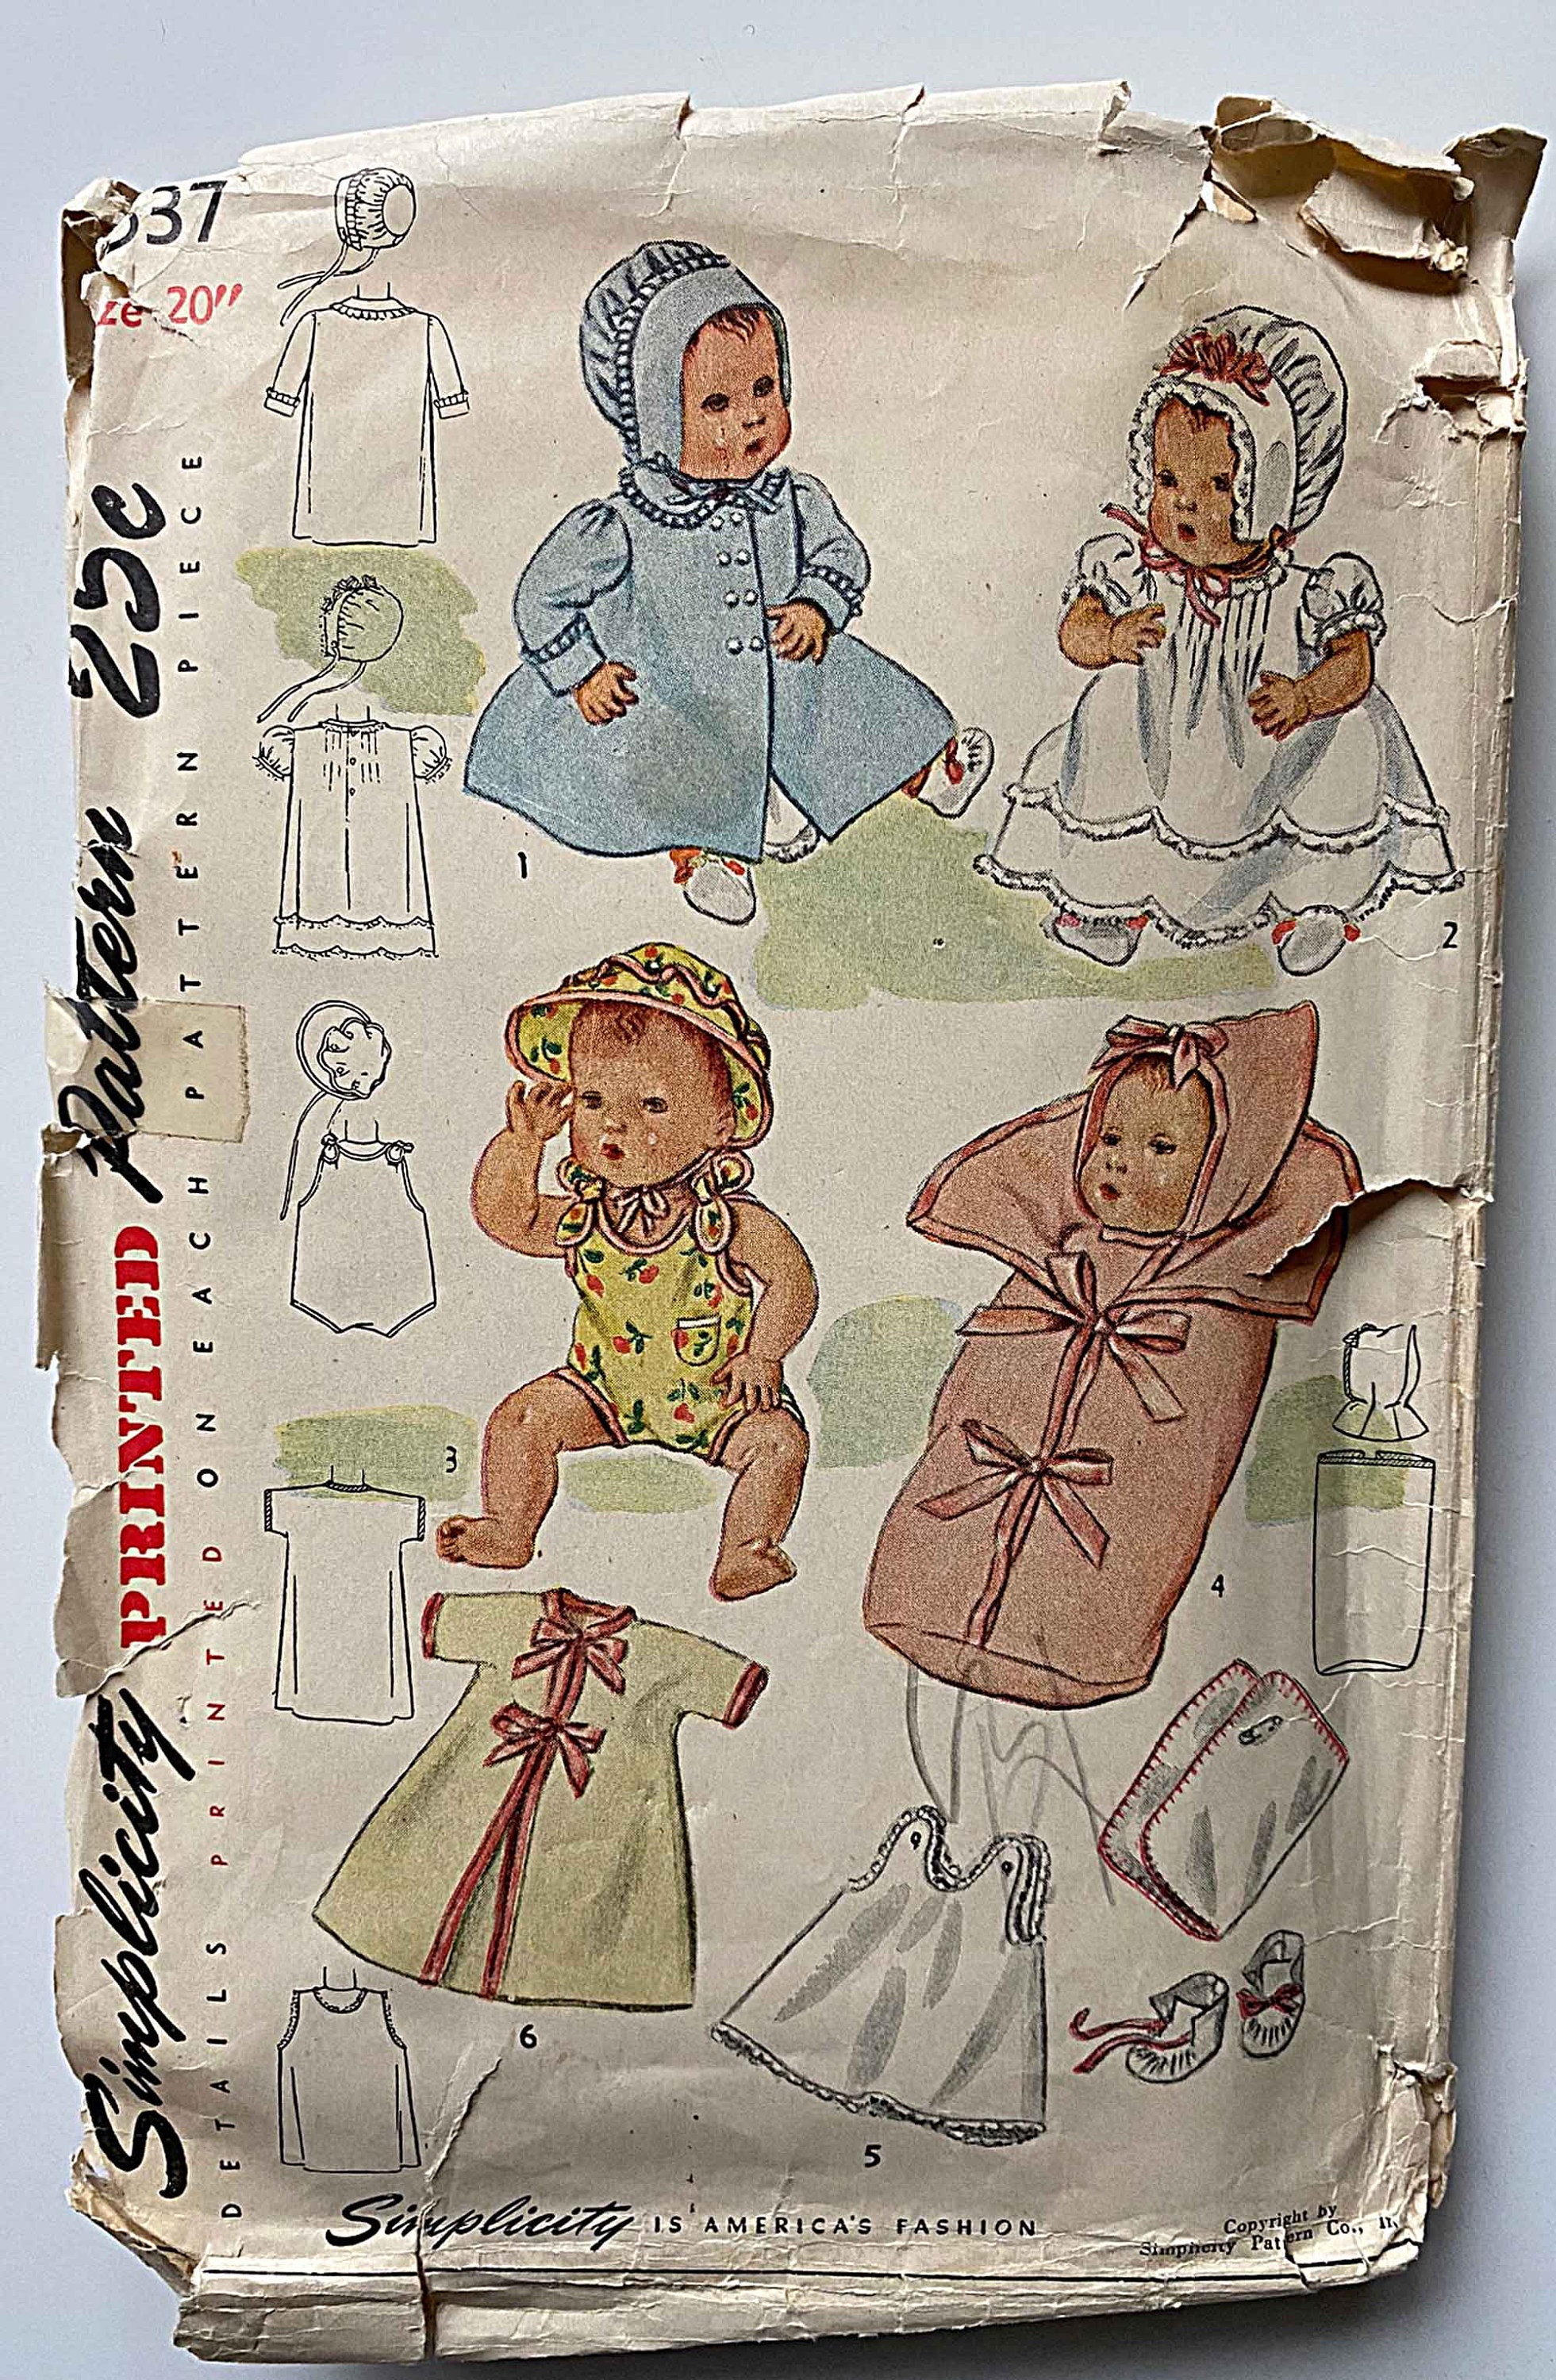 Simplicity Pattern 5554 Sewing Patterns for Dummies Doll Bassinet, pillow,  quilt, diaper bag, bunting and undies doll size small through large